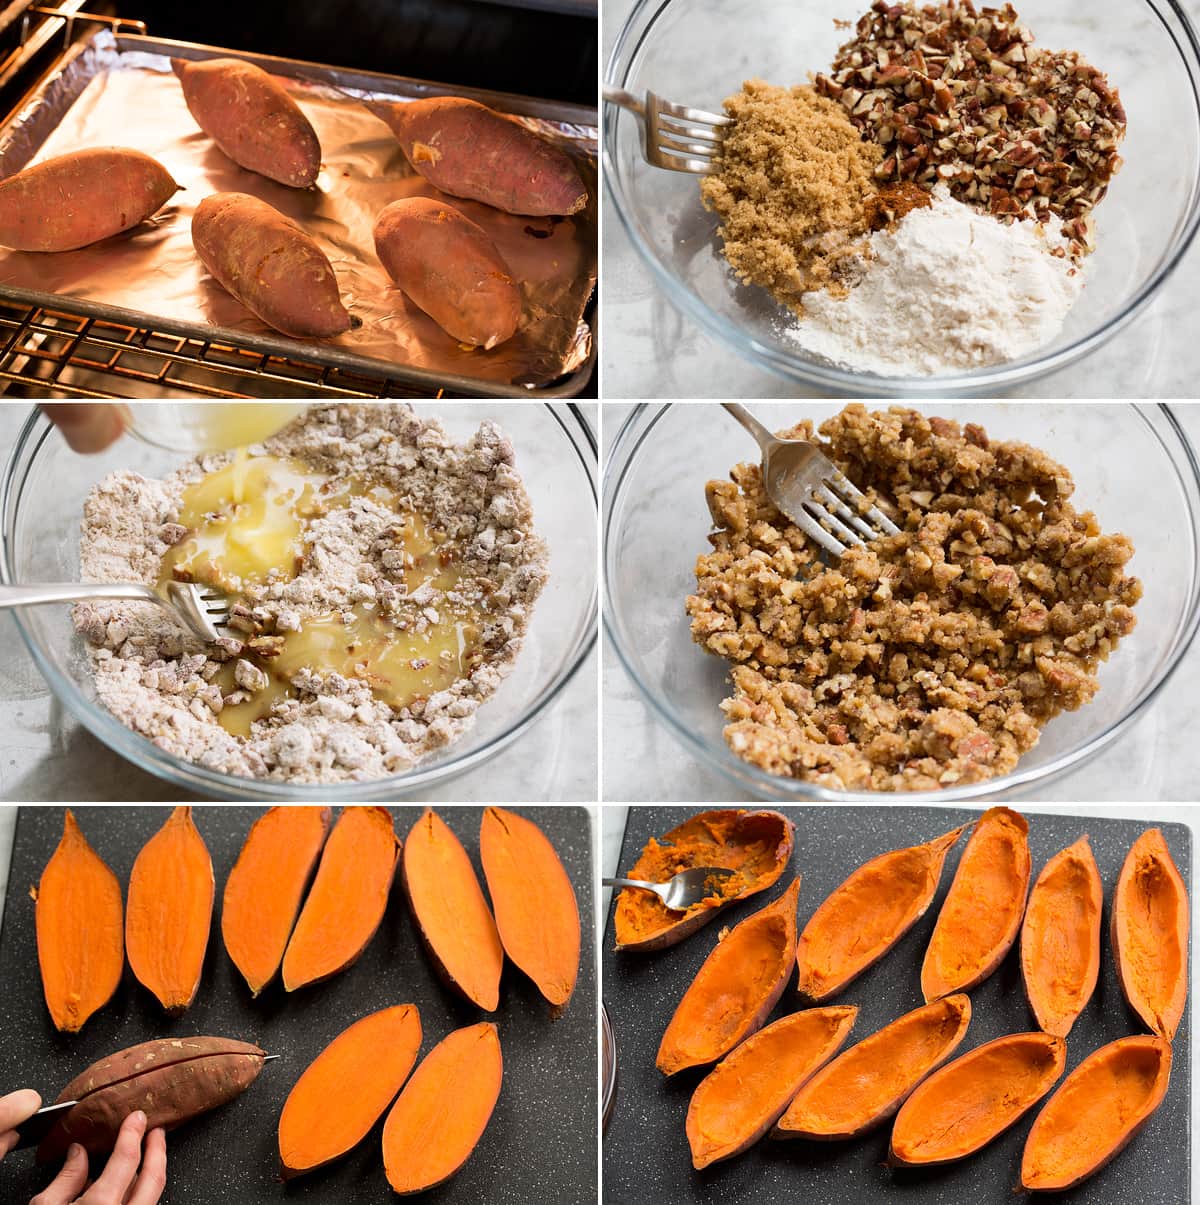 Collage of six images showing steps of making twice baked sweet potatoes.